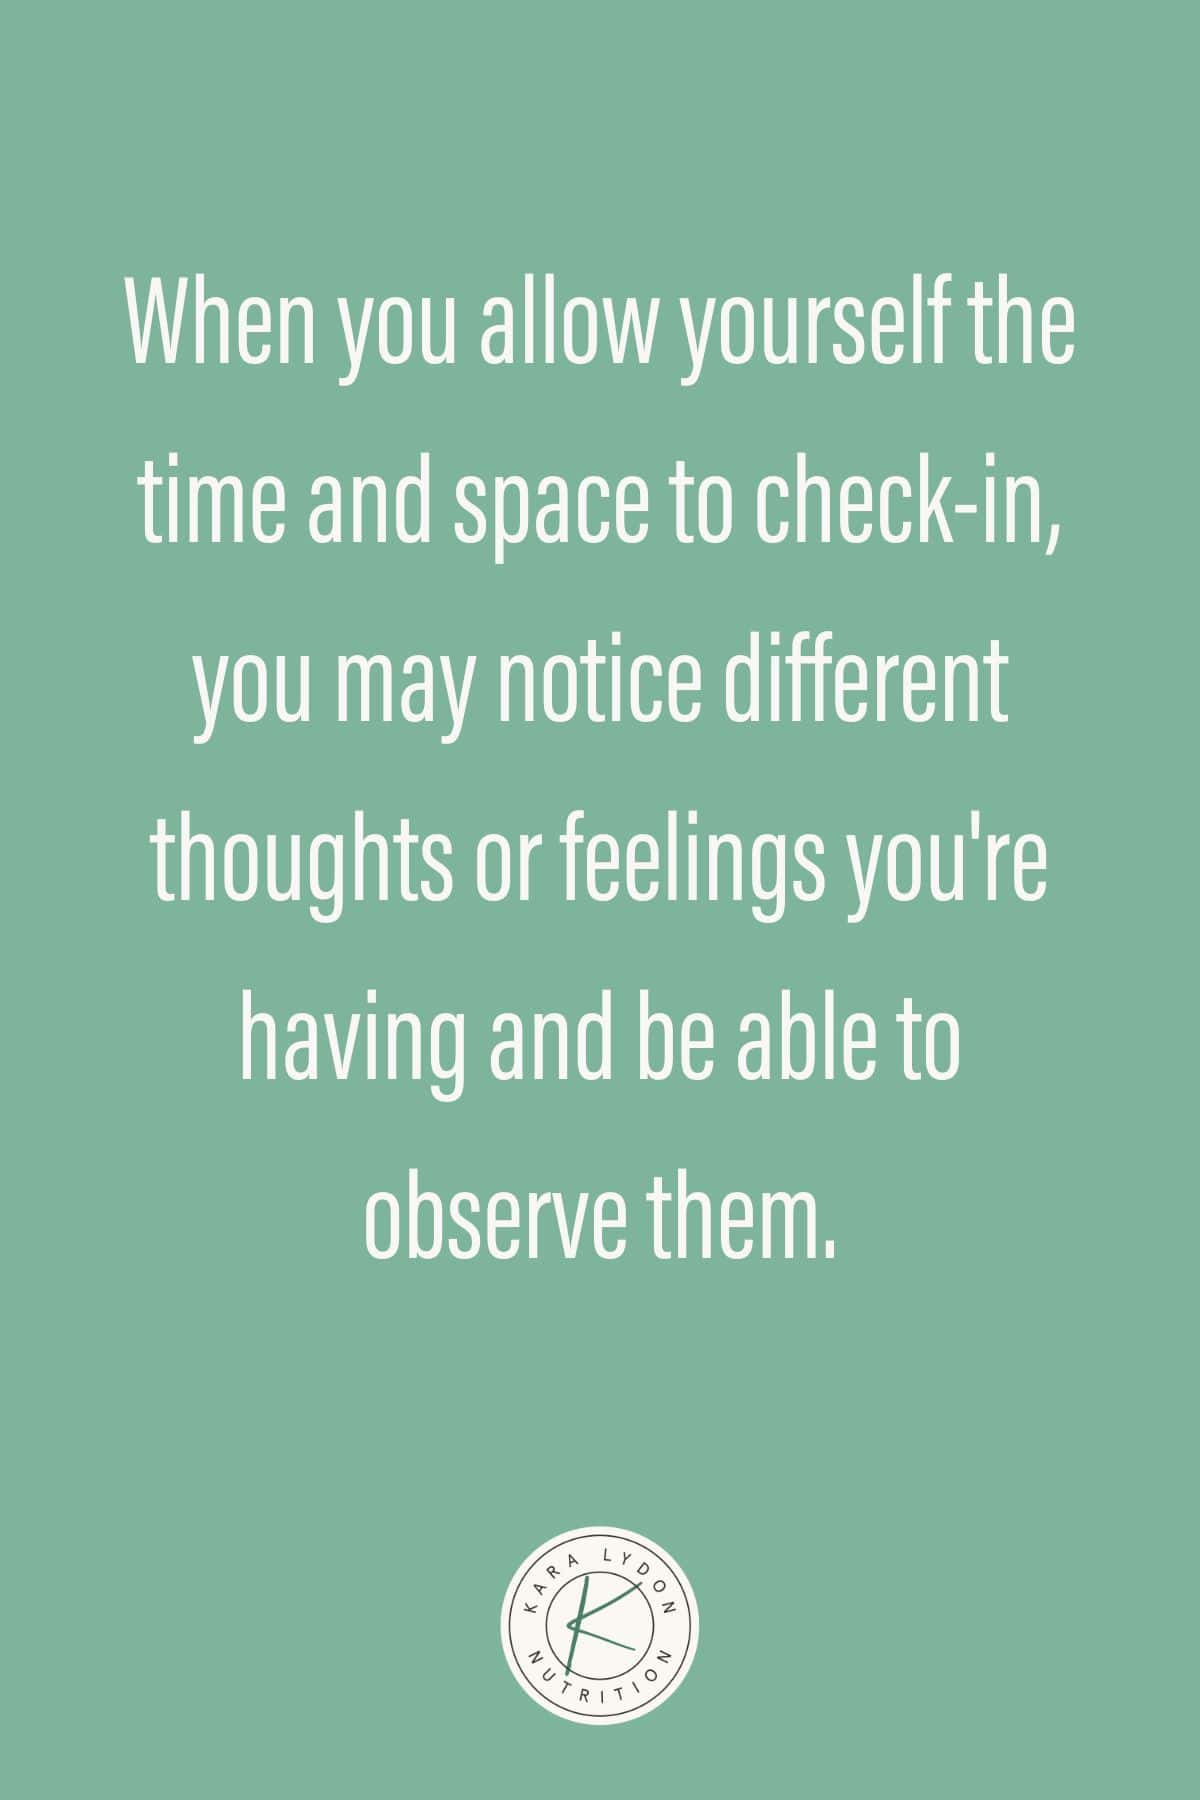 graphic with quote: "When you allow yourself the time and space to check-in, you may notice different thoughts or feelings you're having and be able to observe them."